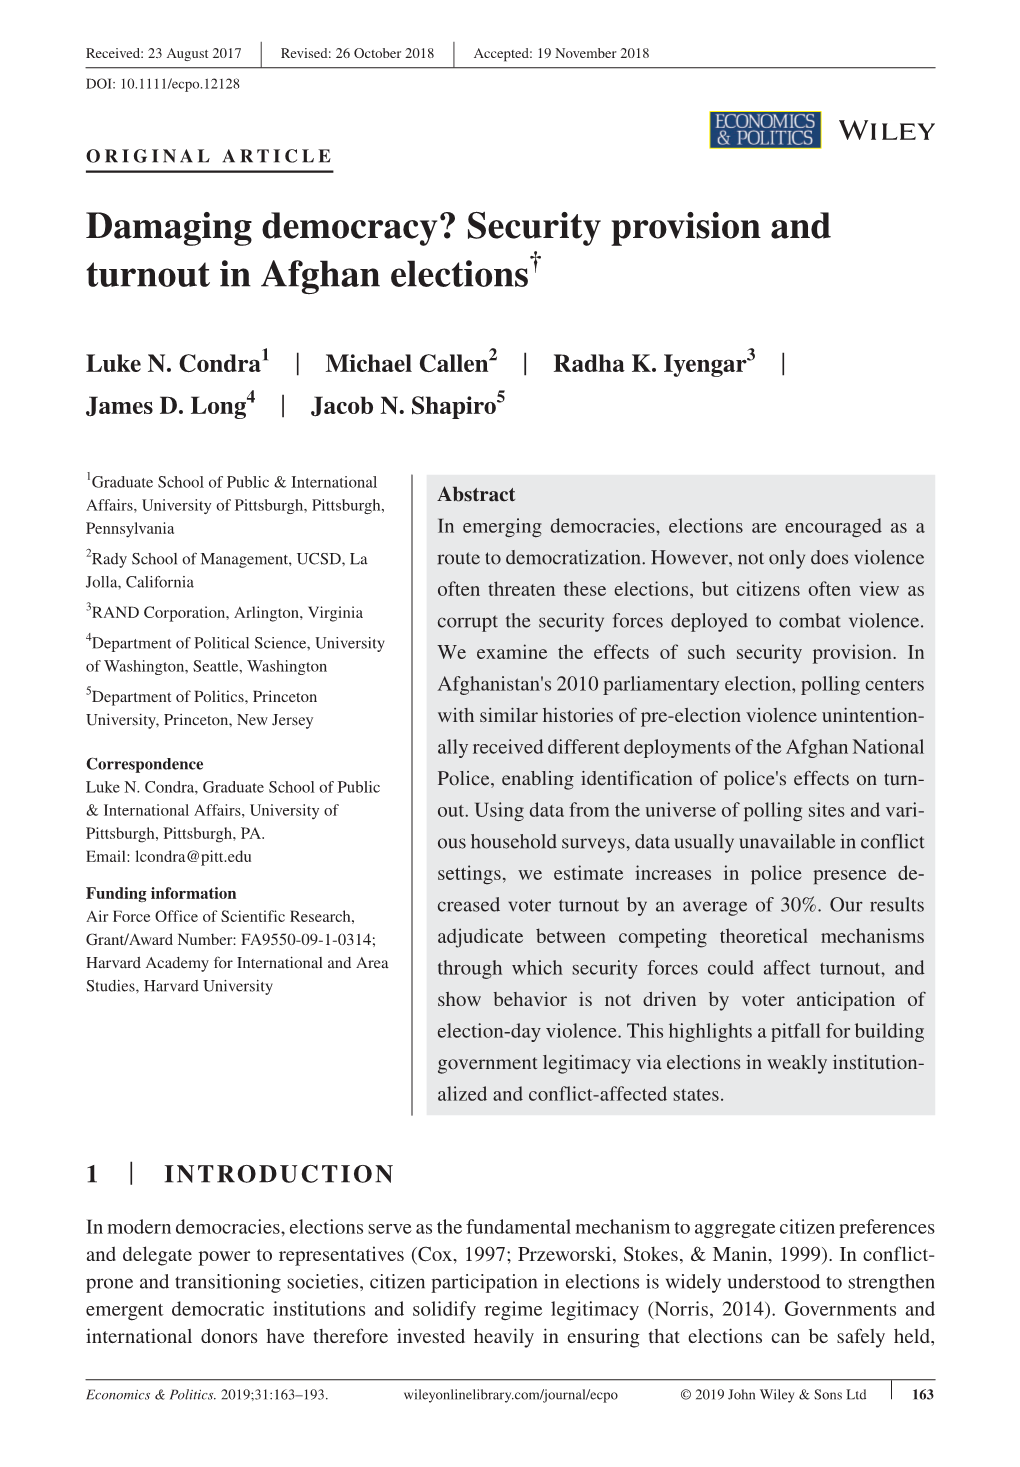 Damaging Democracy? Security Provision and Turnout in Afghan Elections&#X2020;